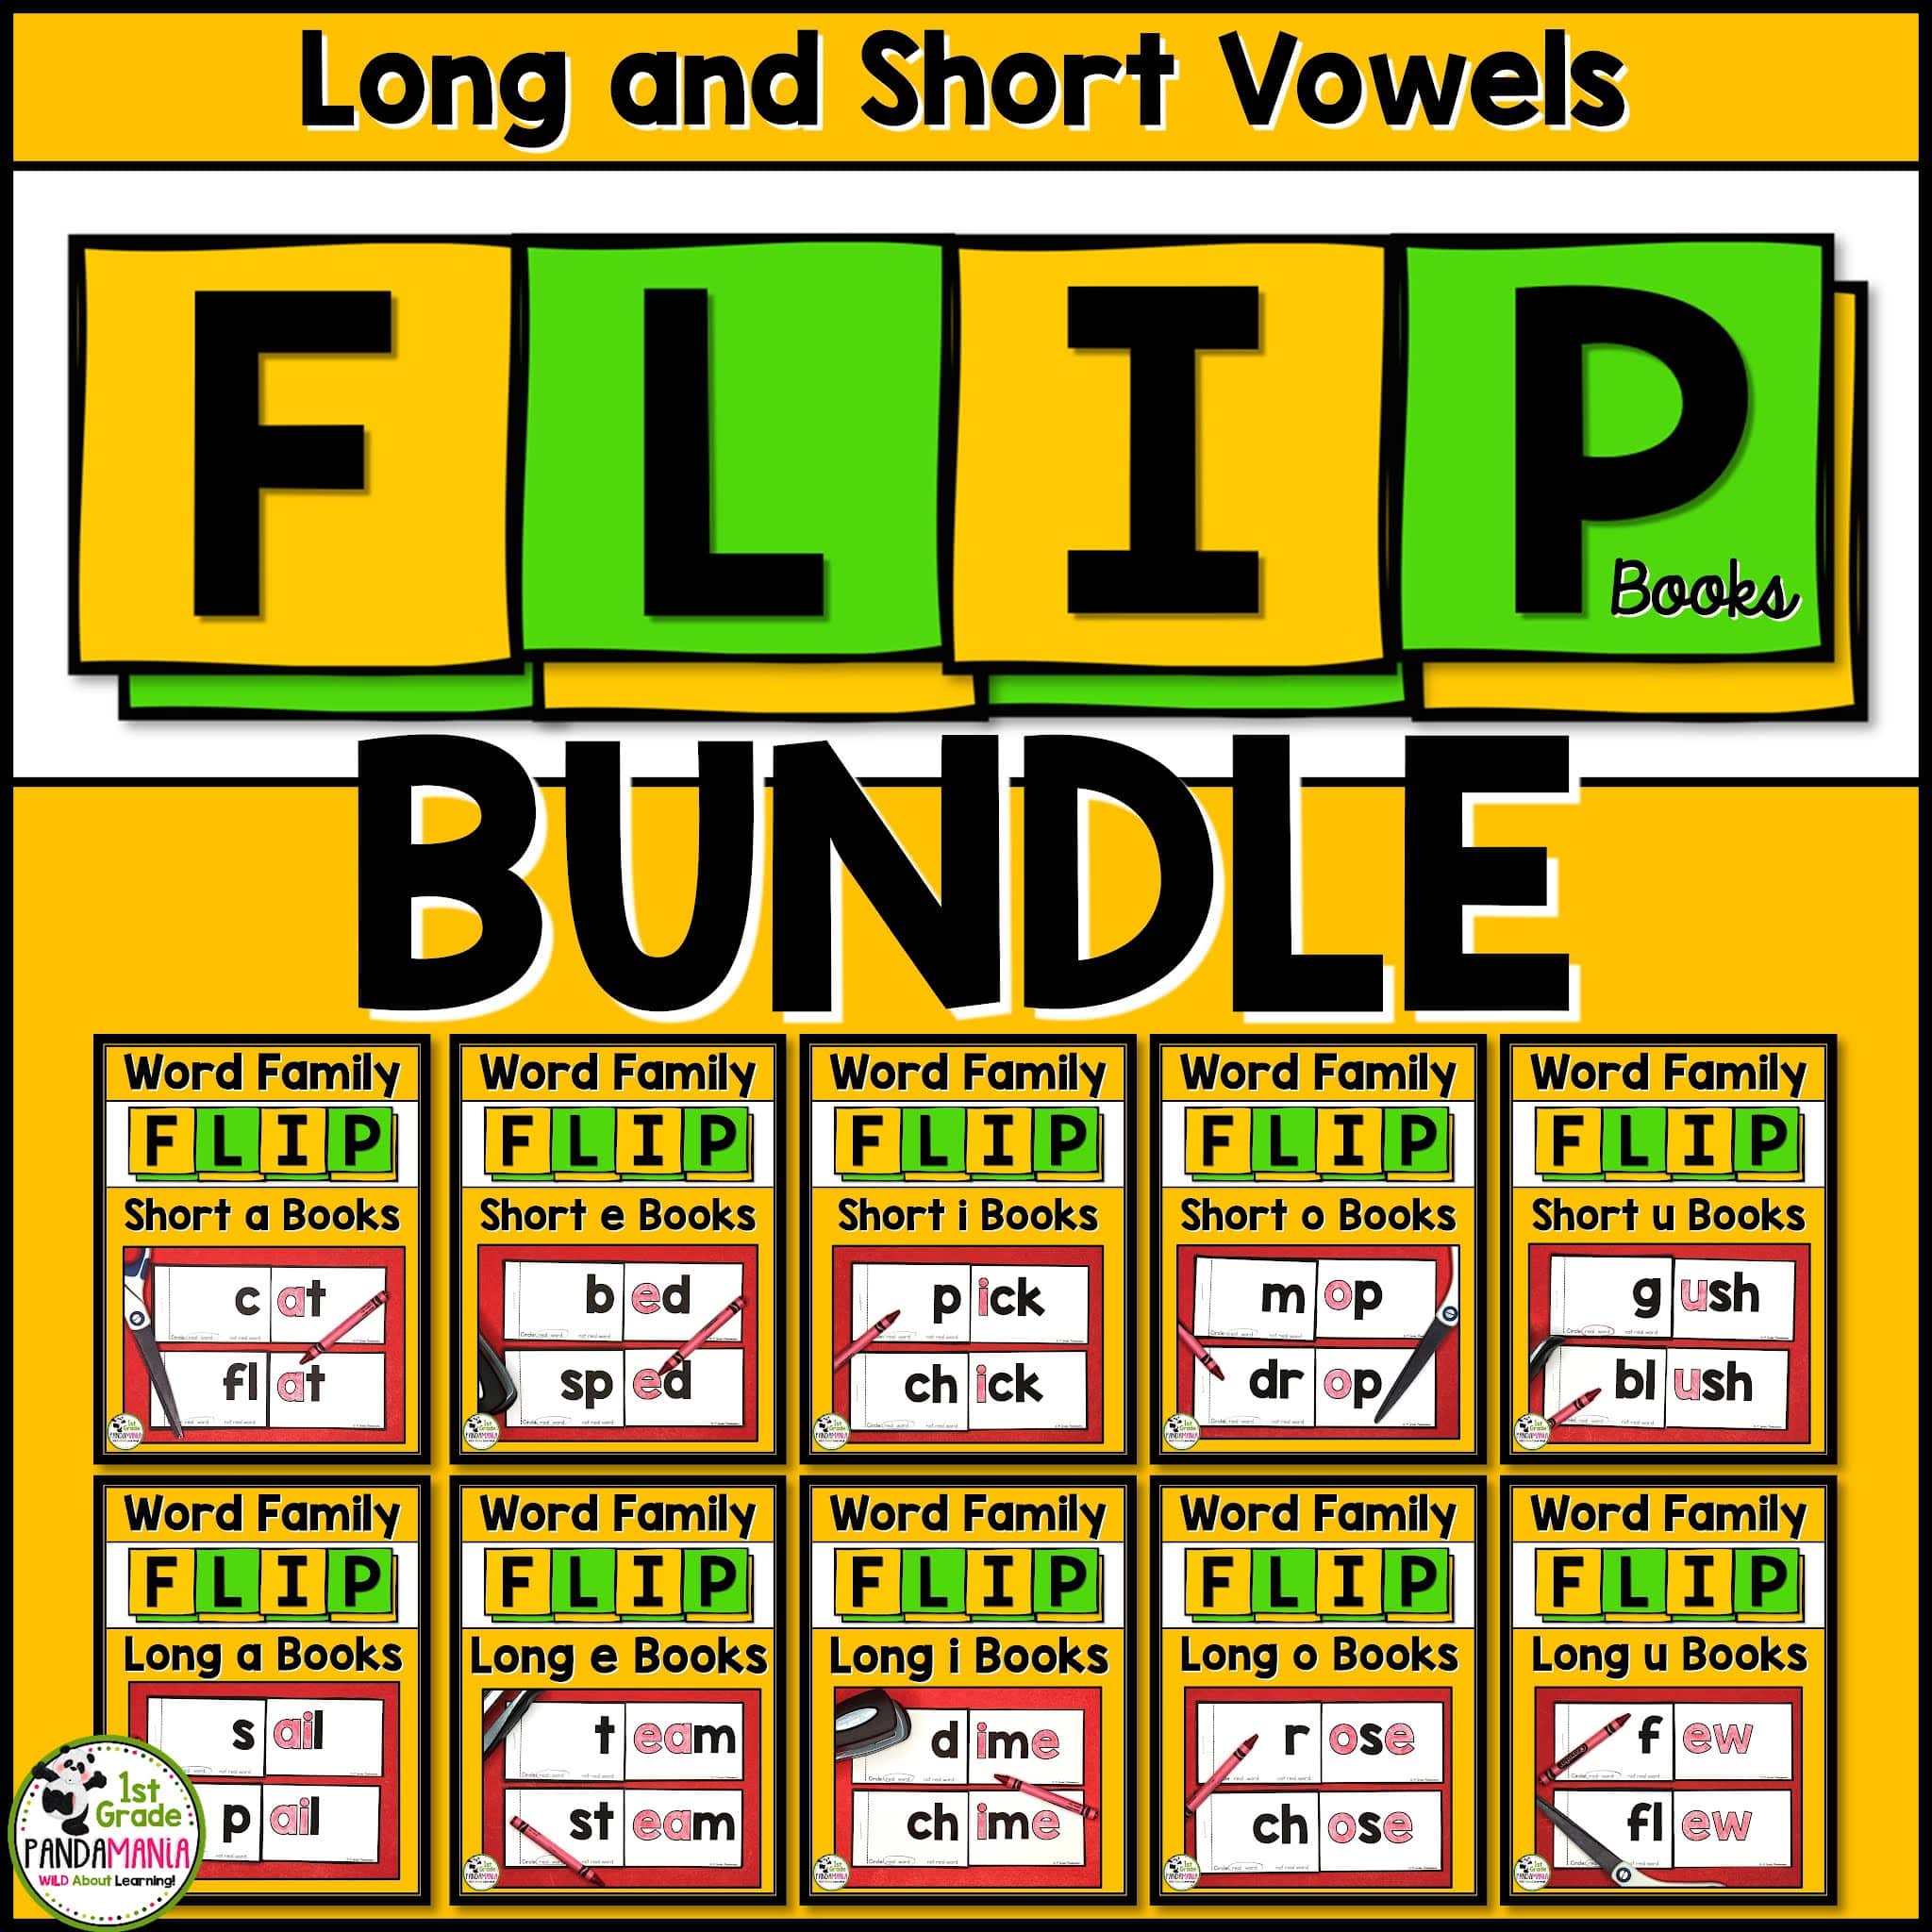 Easy to Make One-Page Word Family FLIP Books! - 1st Grade Pandamania